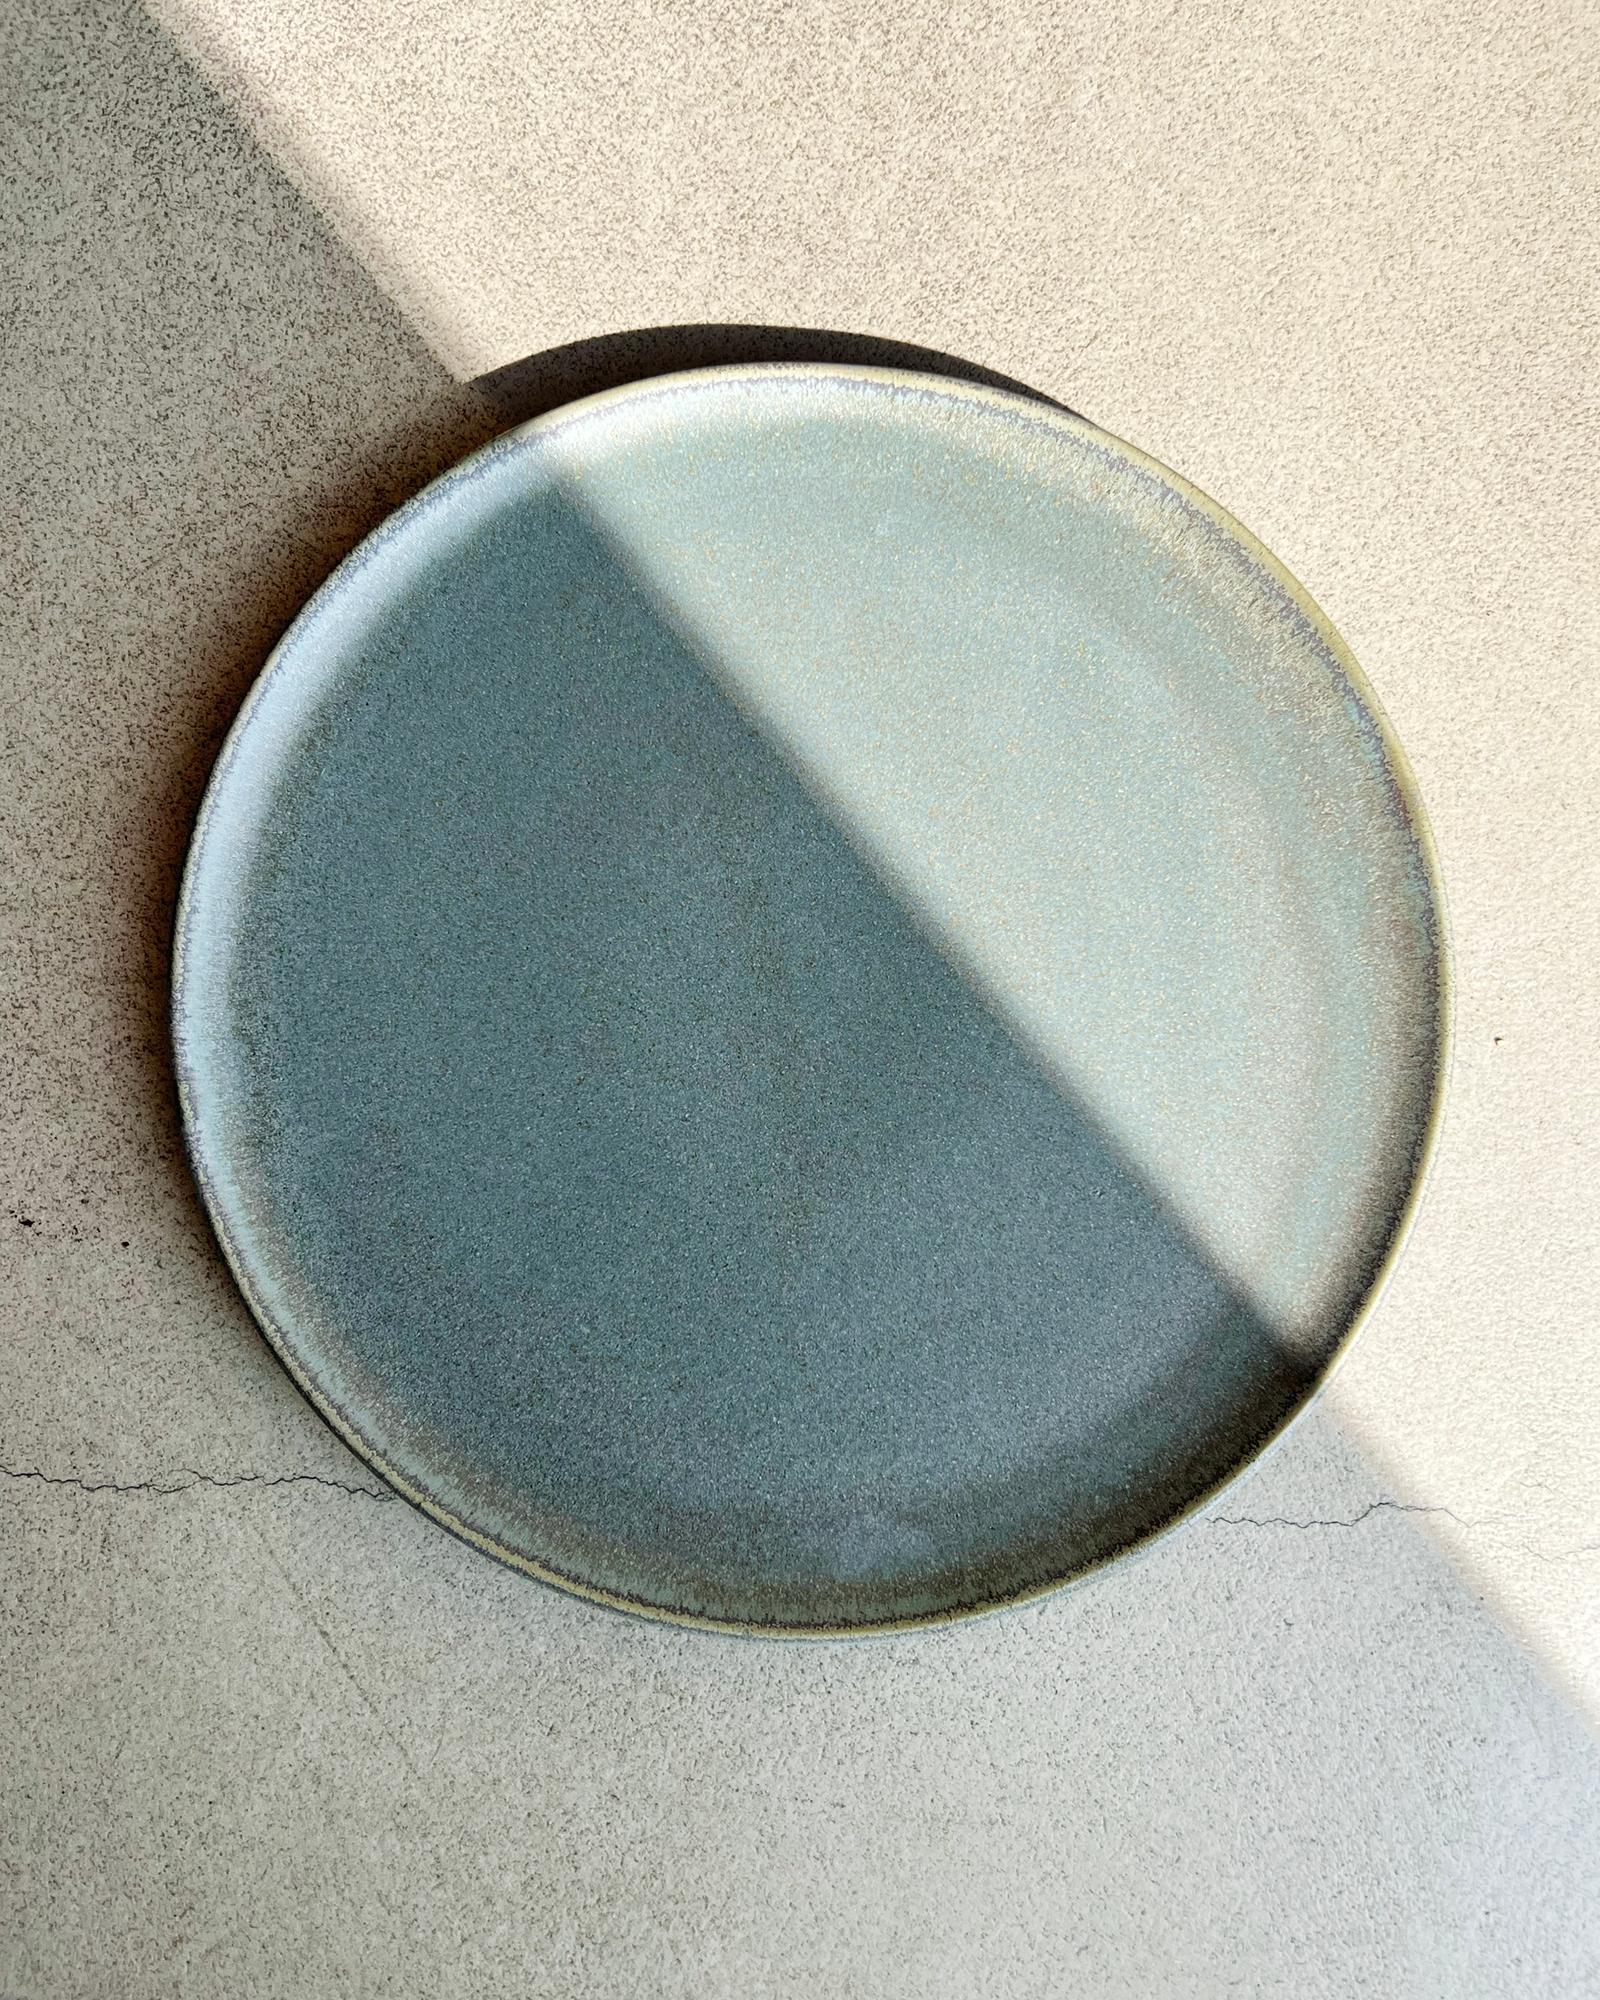 Aqua Handmade Organic Modern Dinner Plates, Set of 4 In New Condition For Sale In West Hollywood, CA